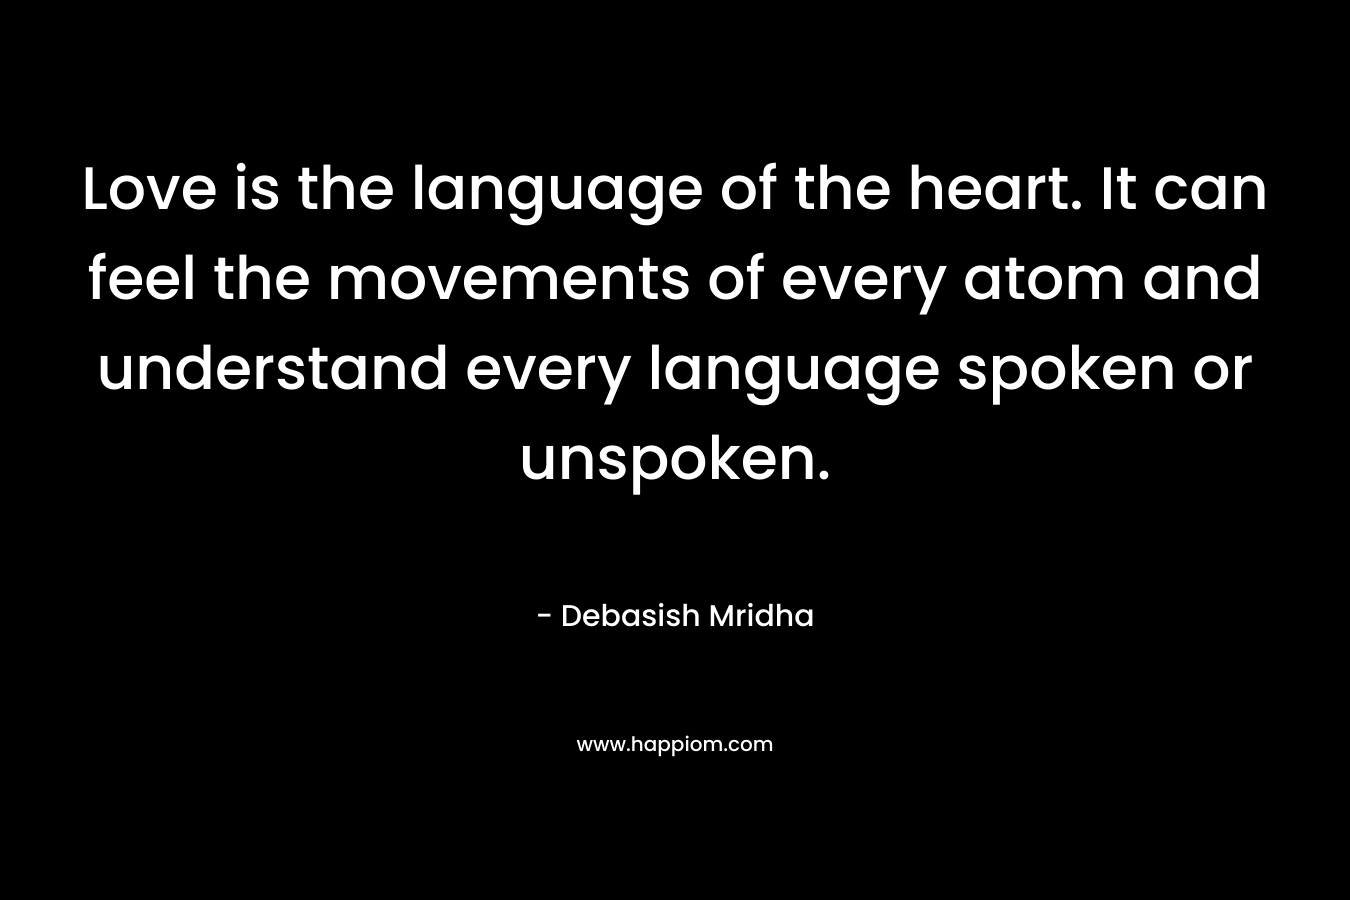 Love is the language of the heart. It can feel the movements of every atom and understand every language spoken or unspoken. – Debasish Mridha